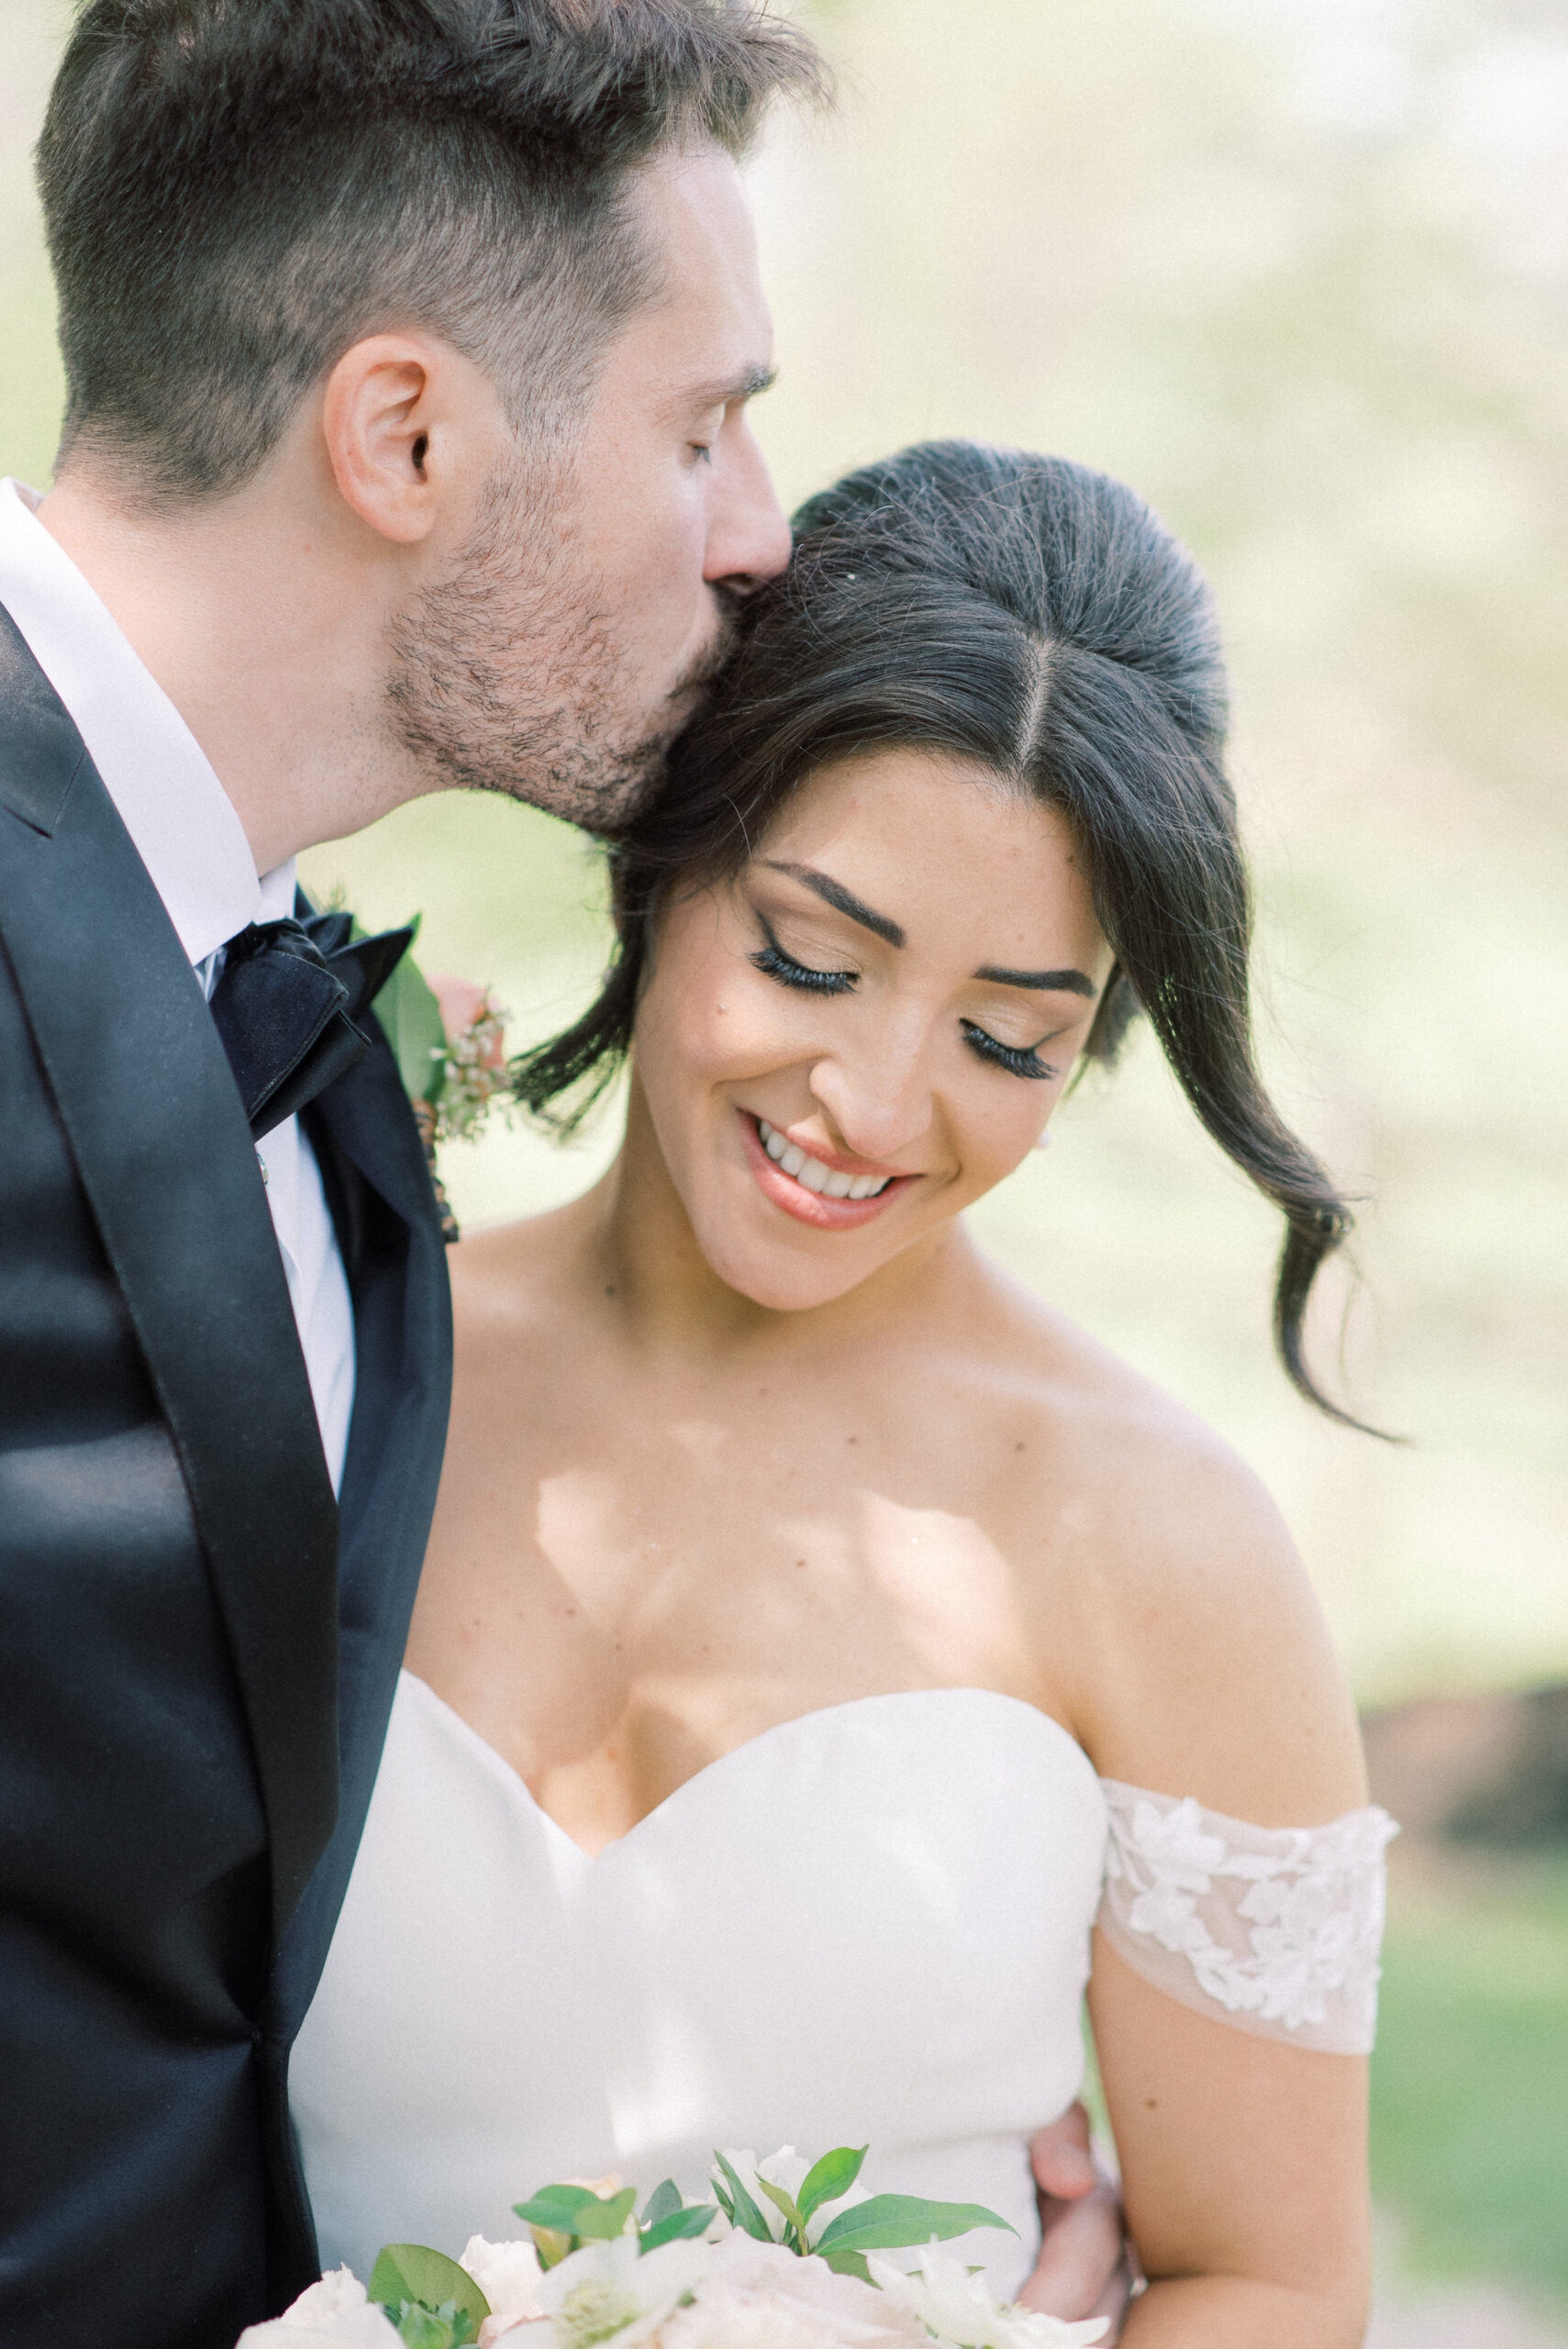 Romantic, light and airy spring garden wedding at the Crossed Keys Estate, Andover, New Jersey